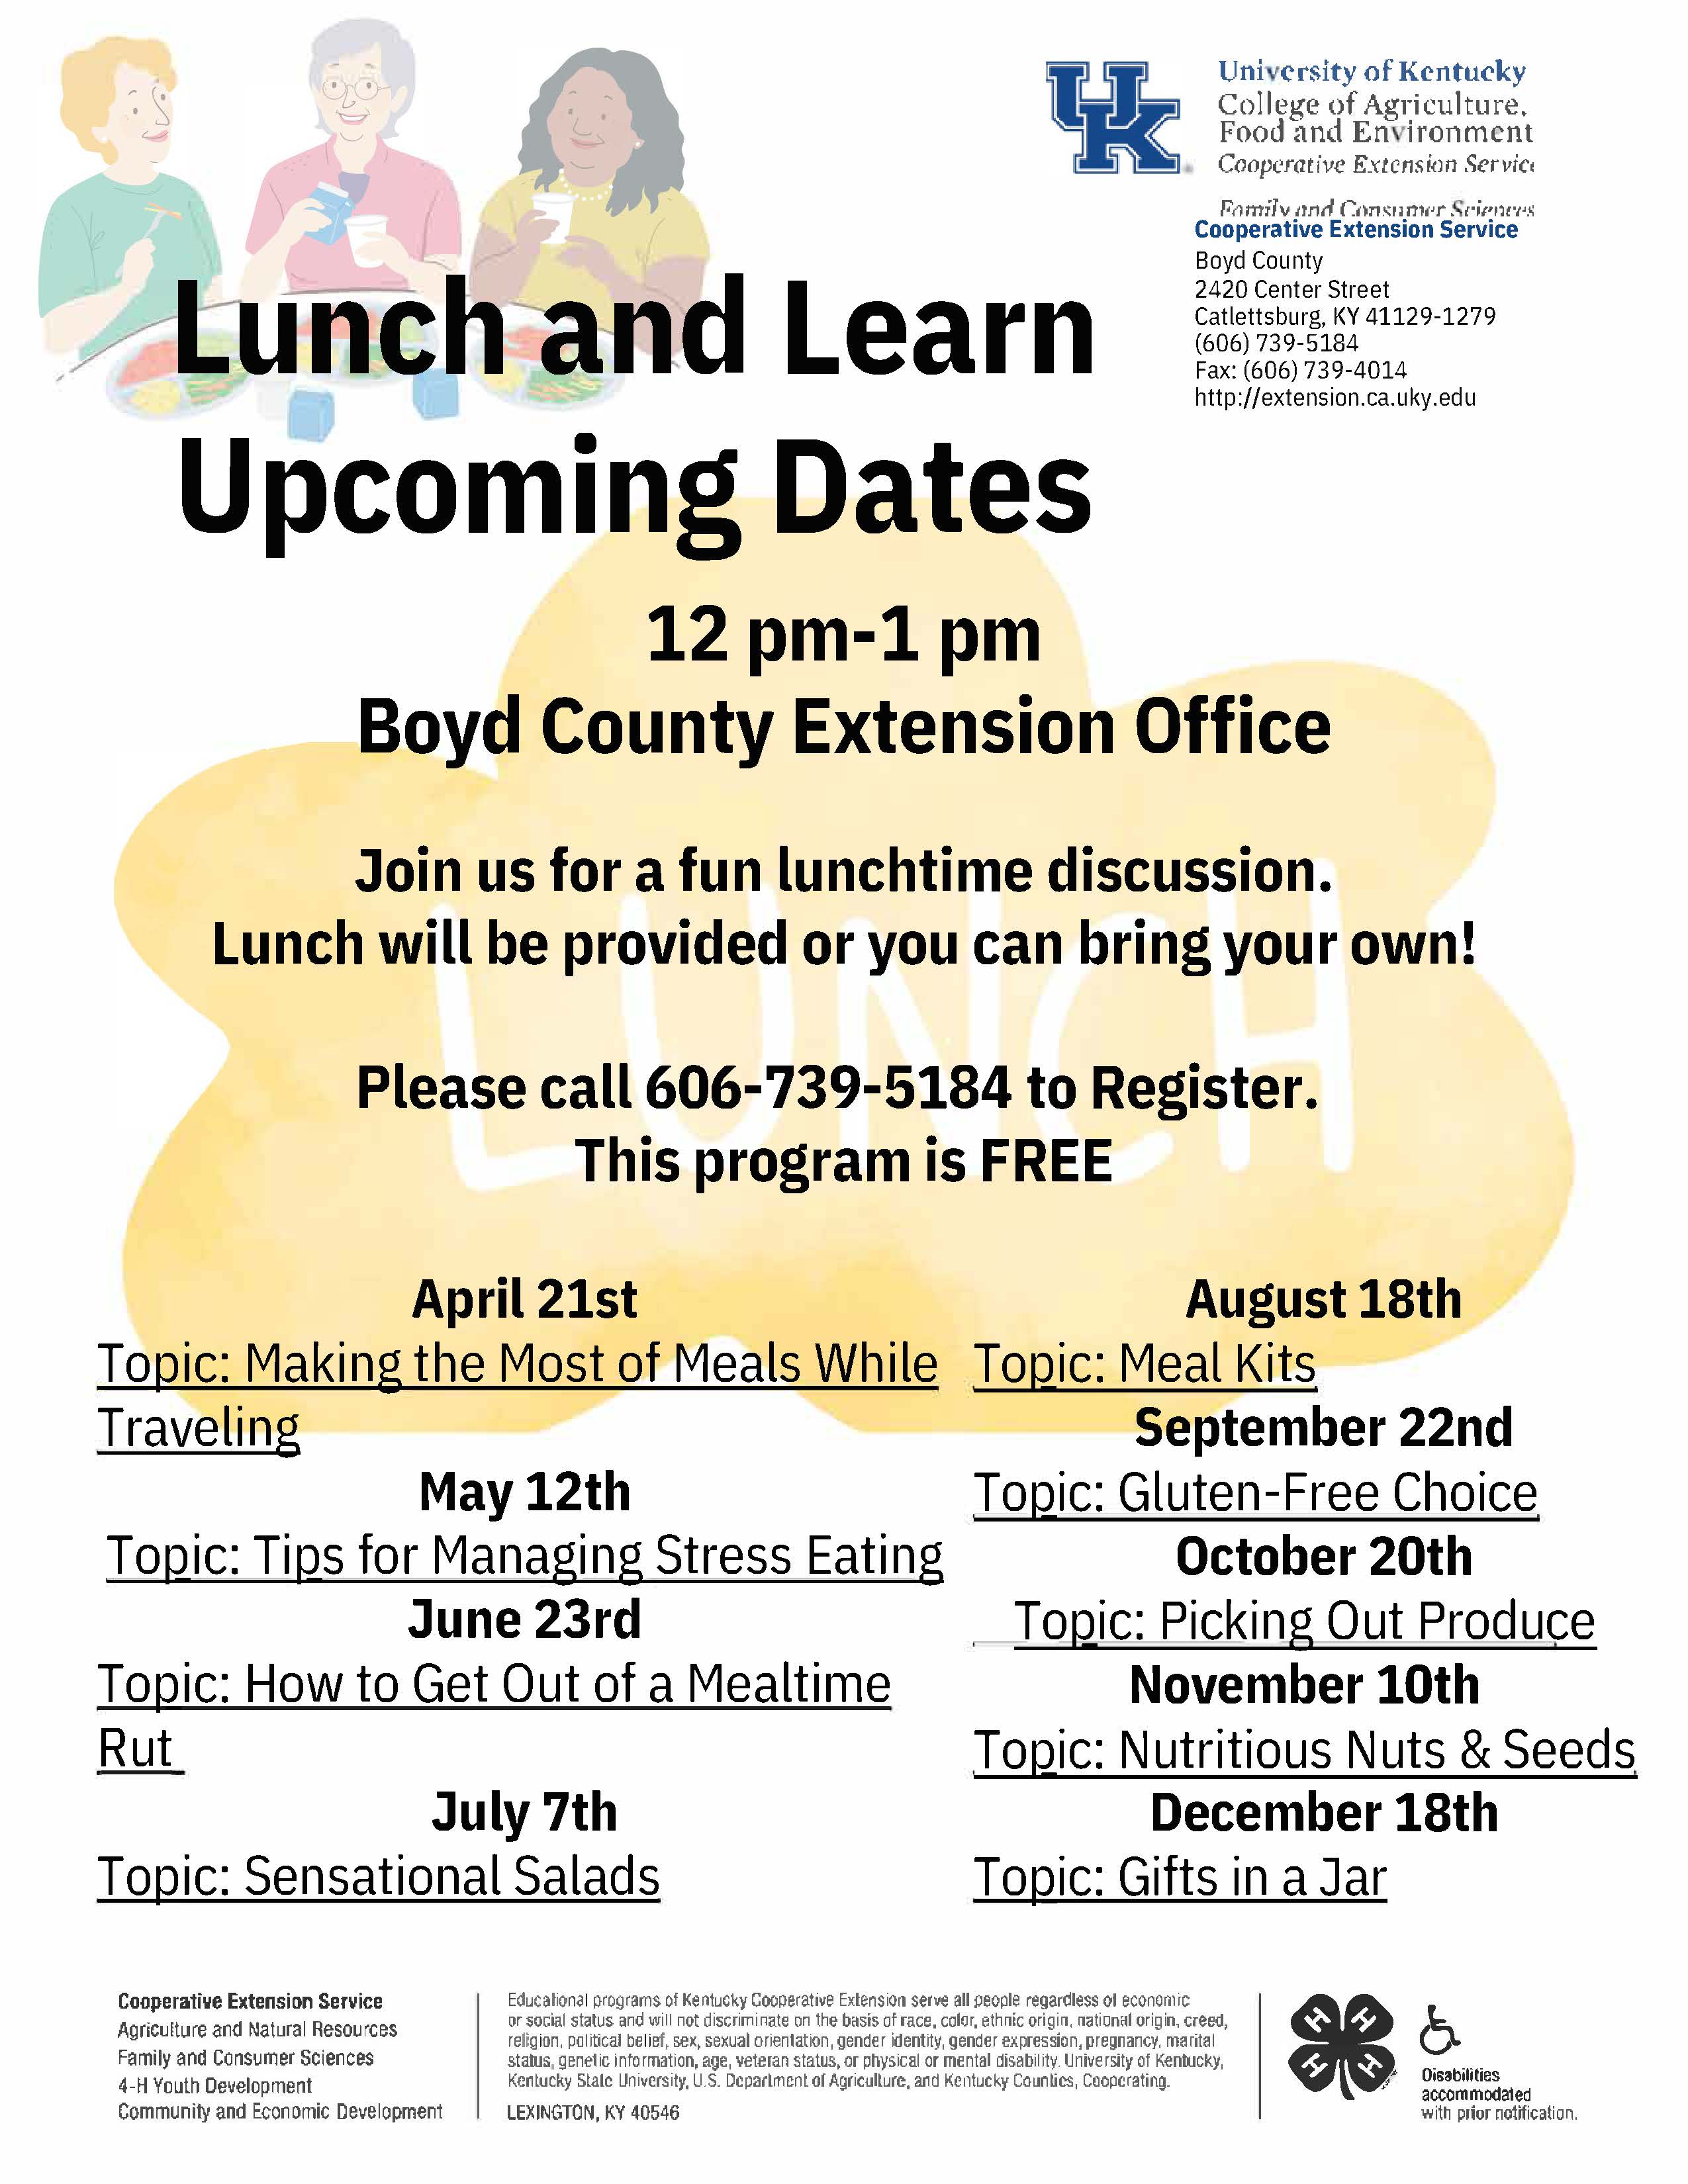 Flyer with schedule for Lunch and Learn series